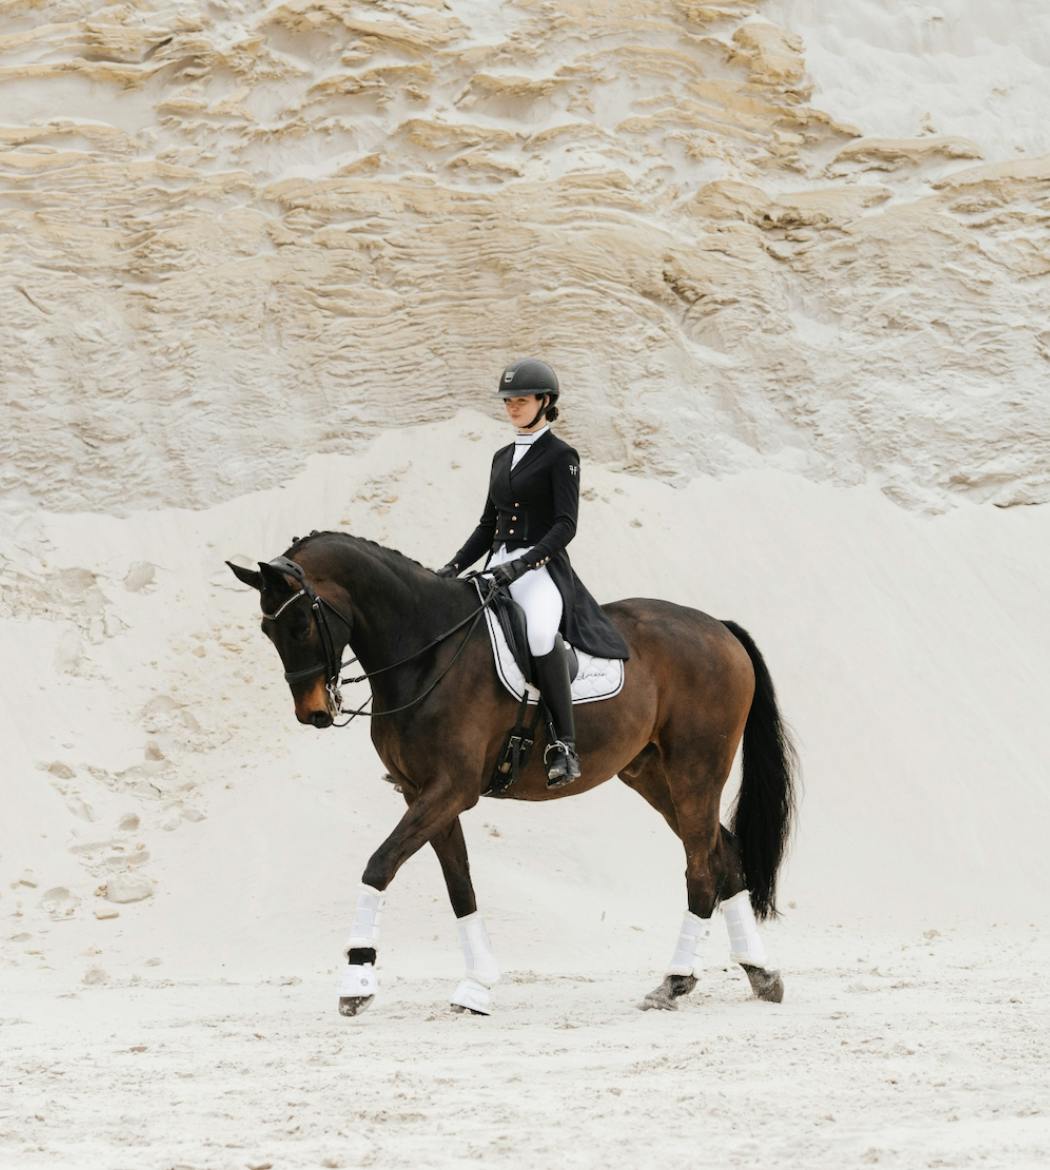 What is dressage?